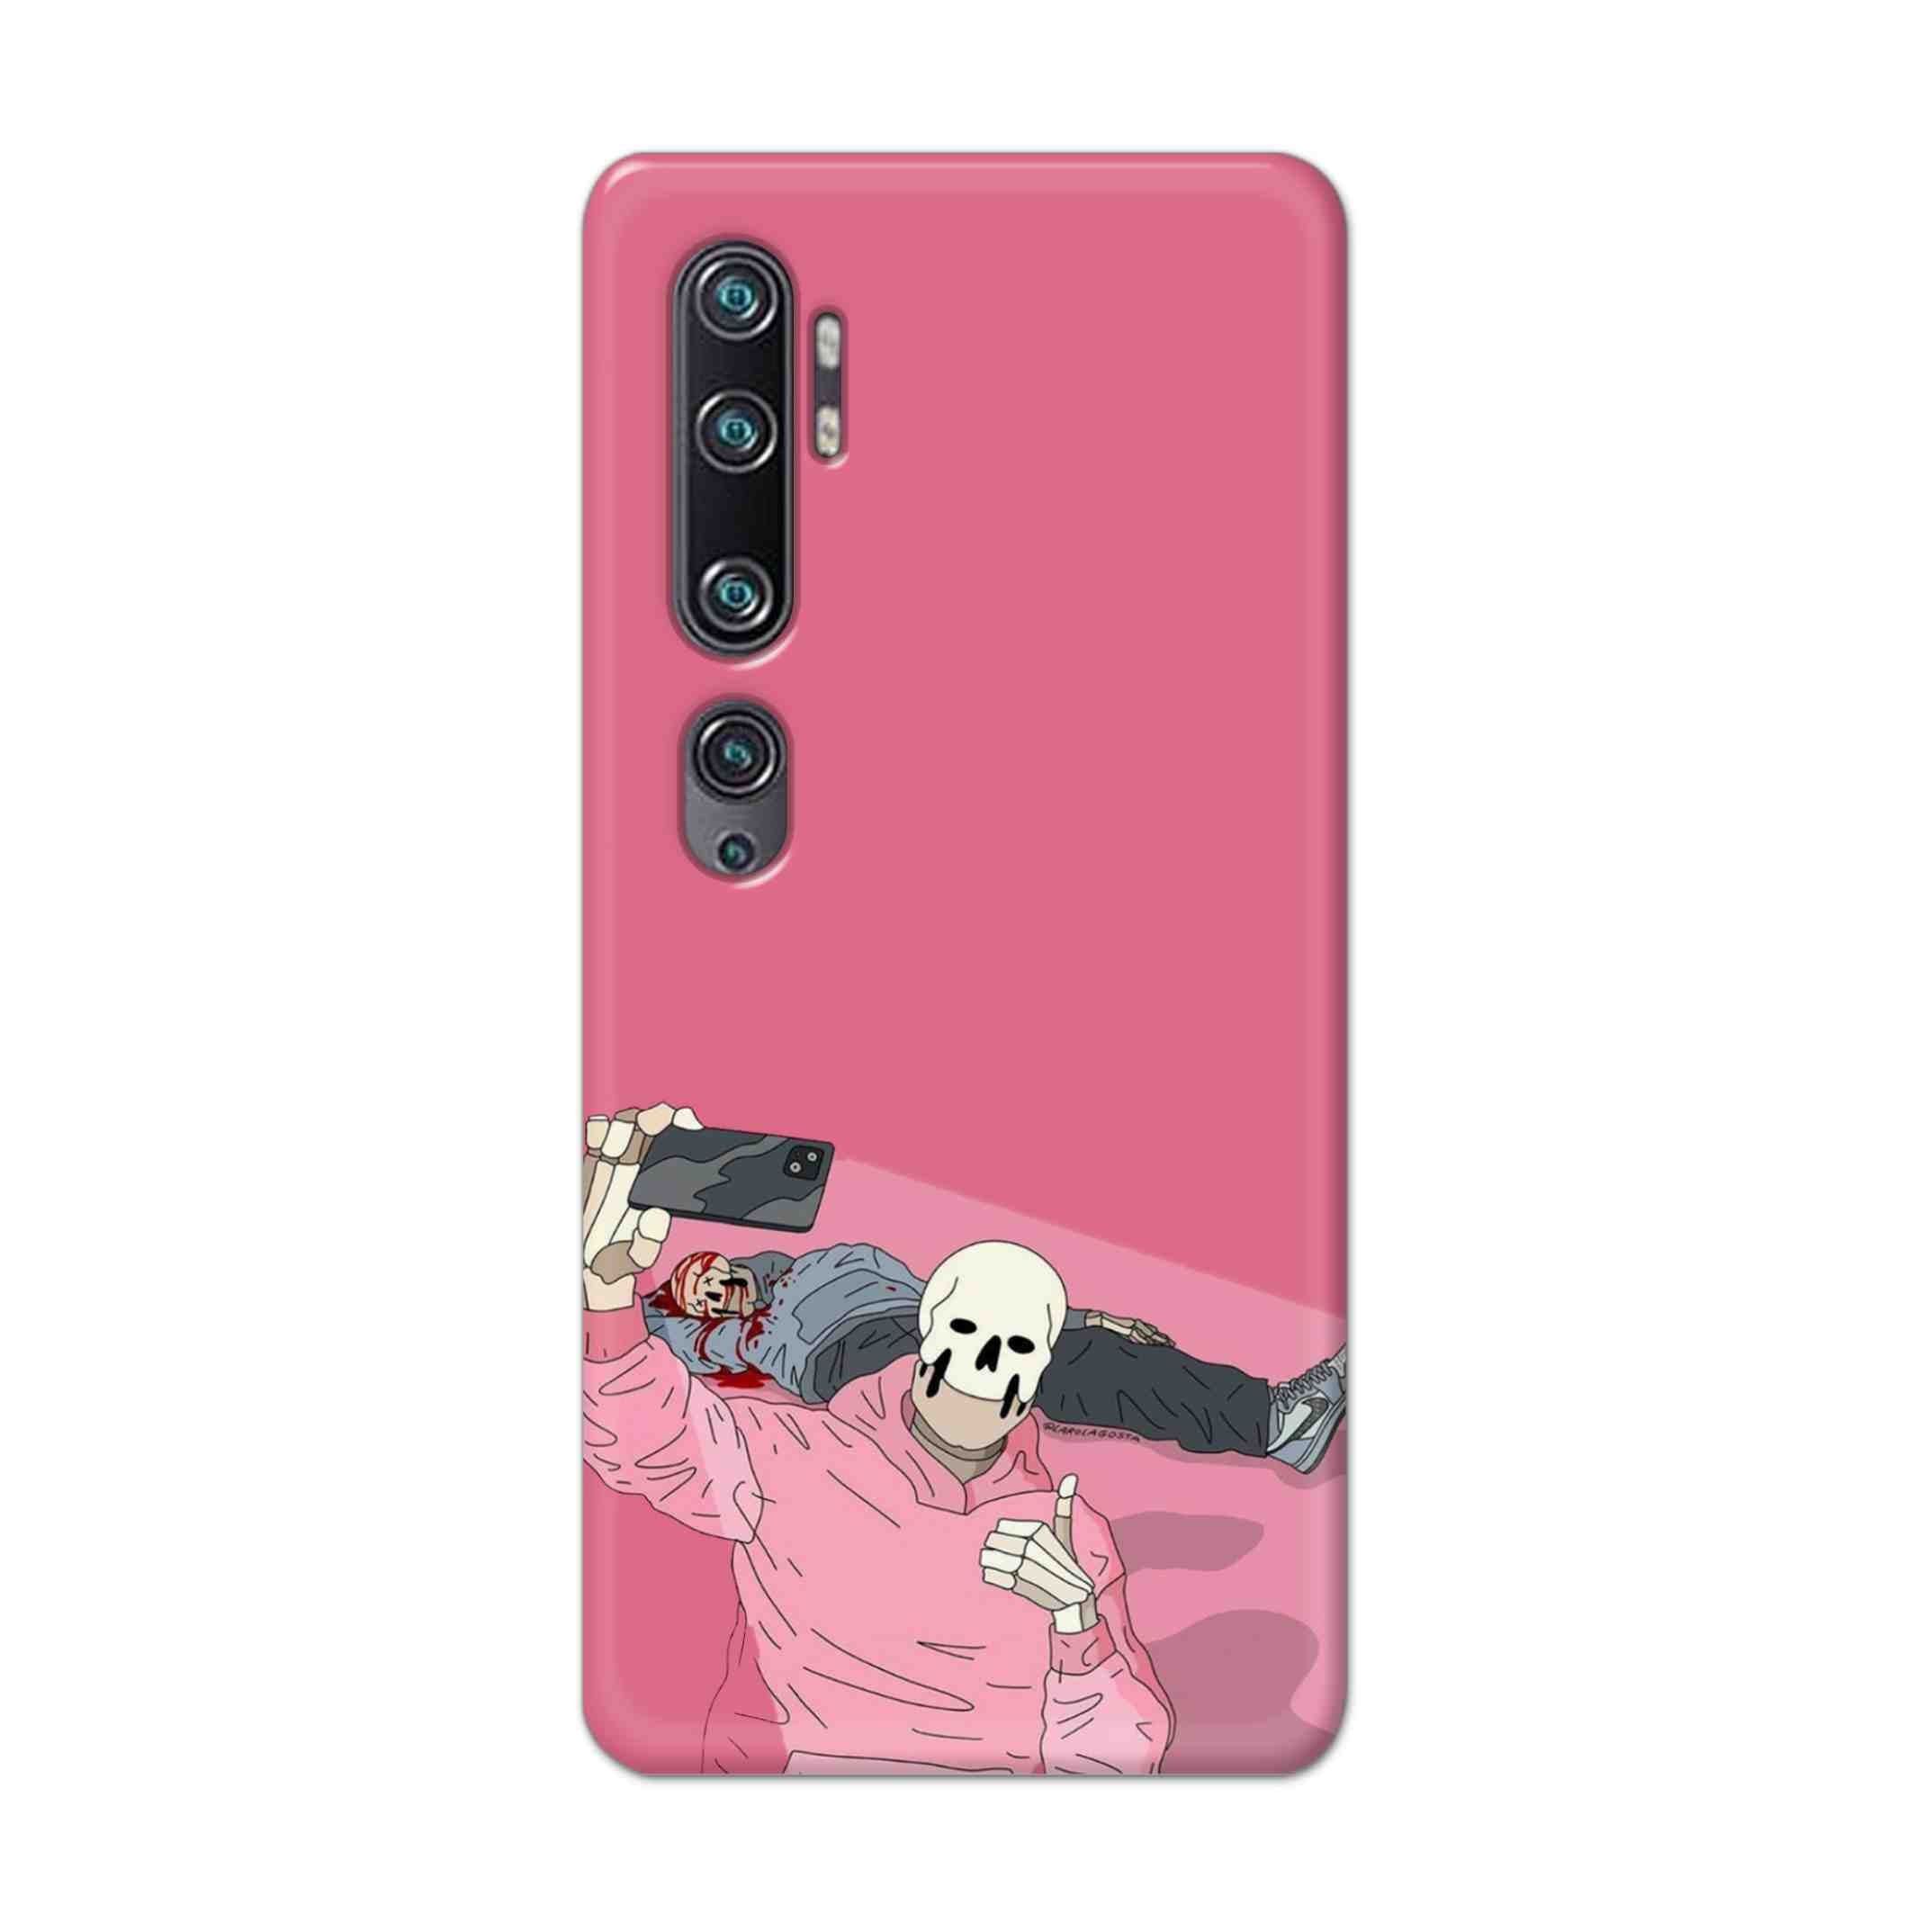 Buy Selfie Hard Back Mobile Phone Case Cover For Xiaomi Mi Note 10 Pro Online